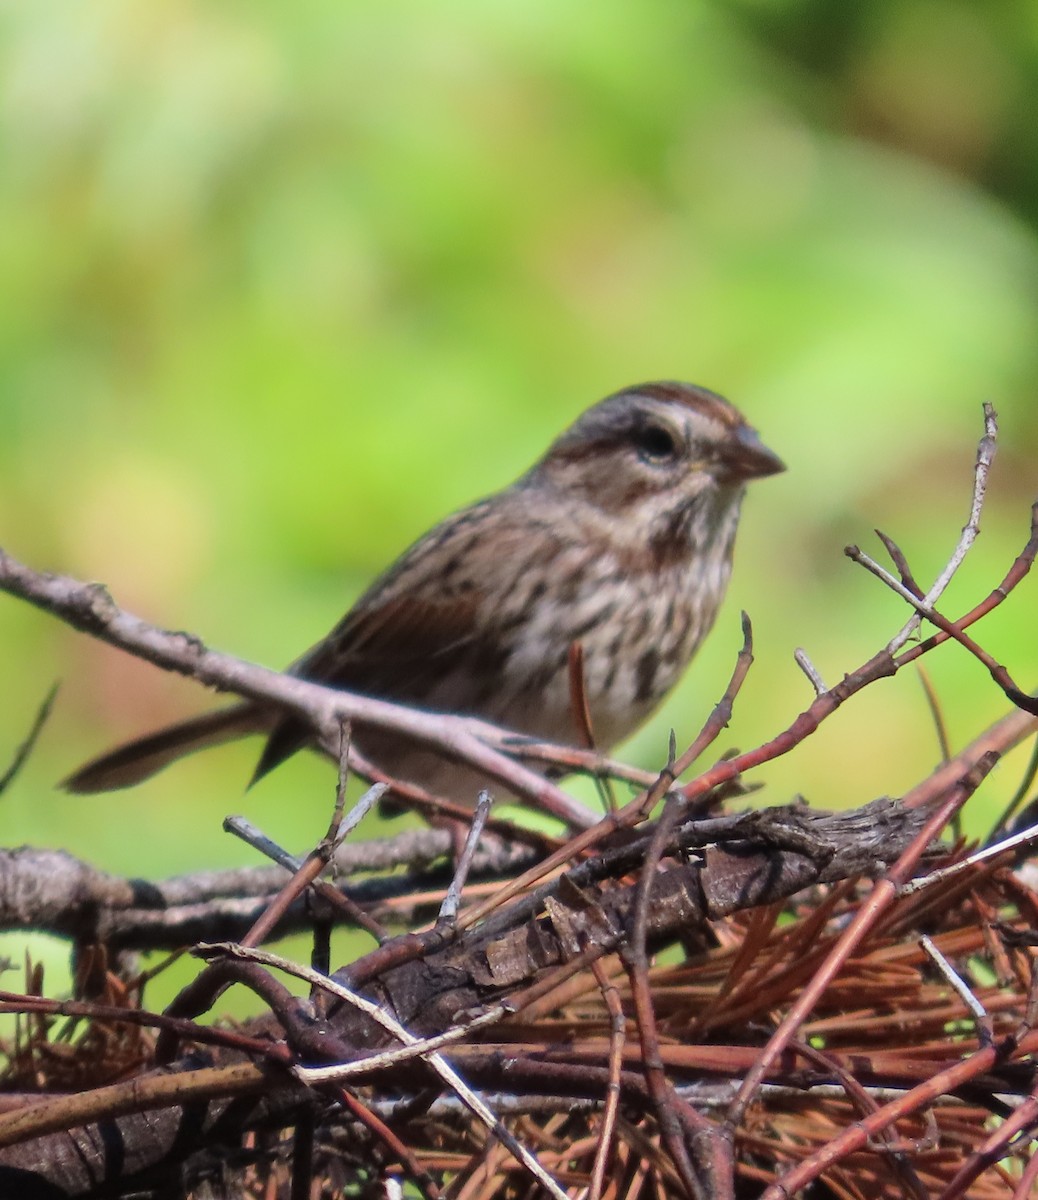 Song Sparrow - The Spotting Twohees